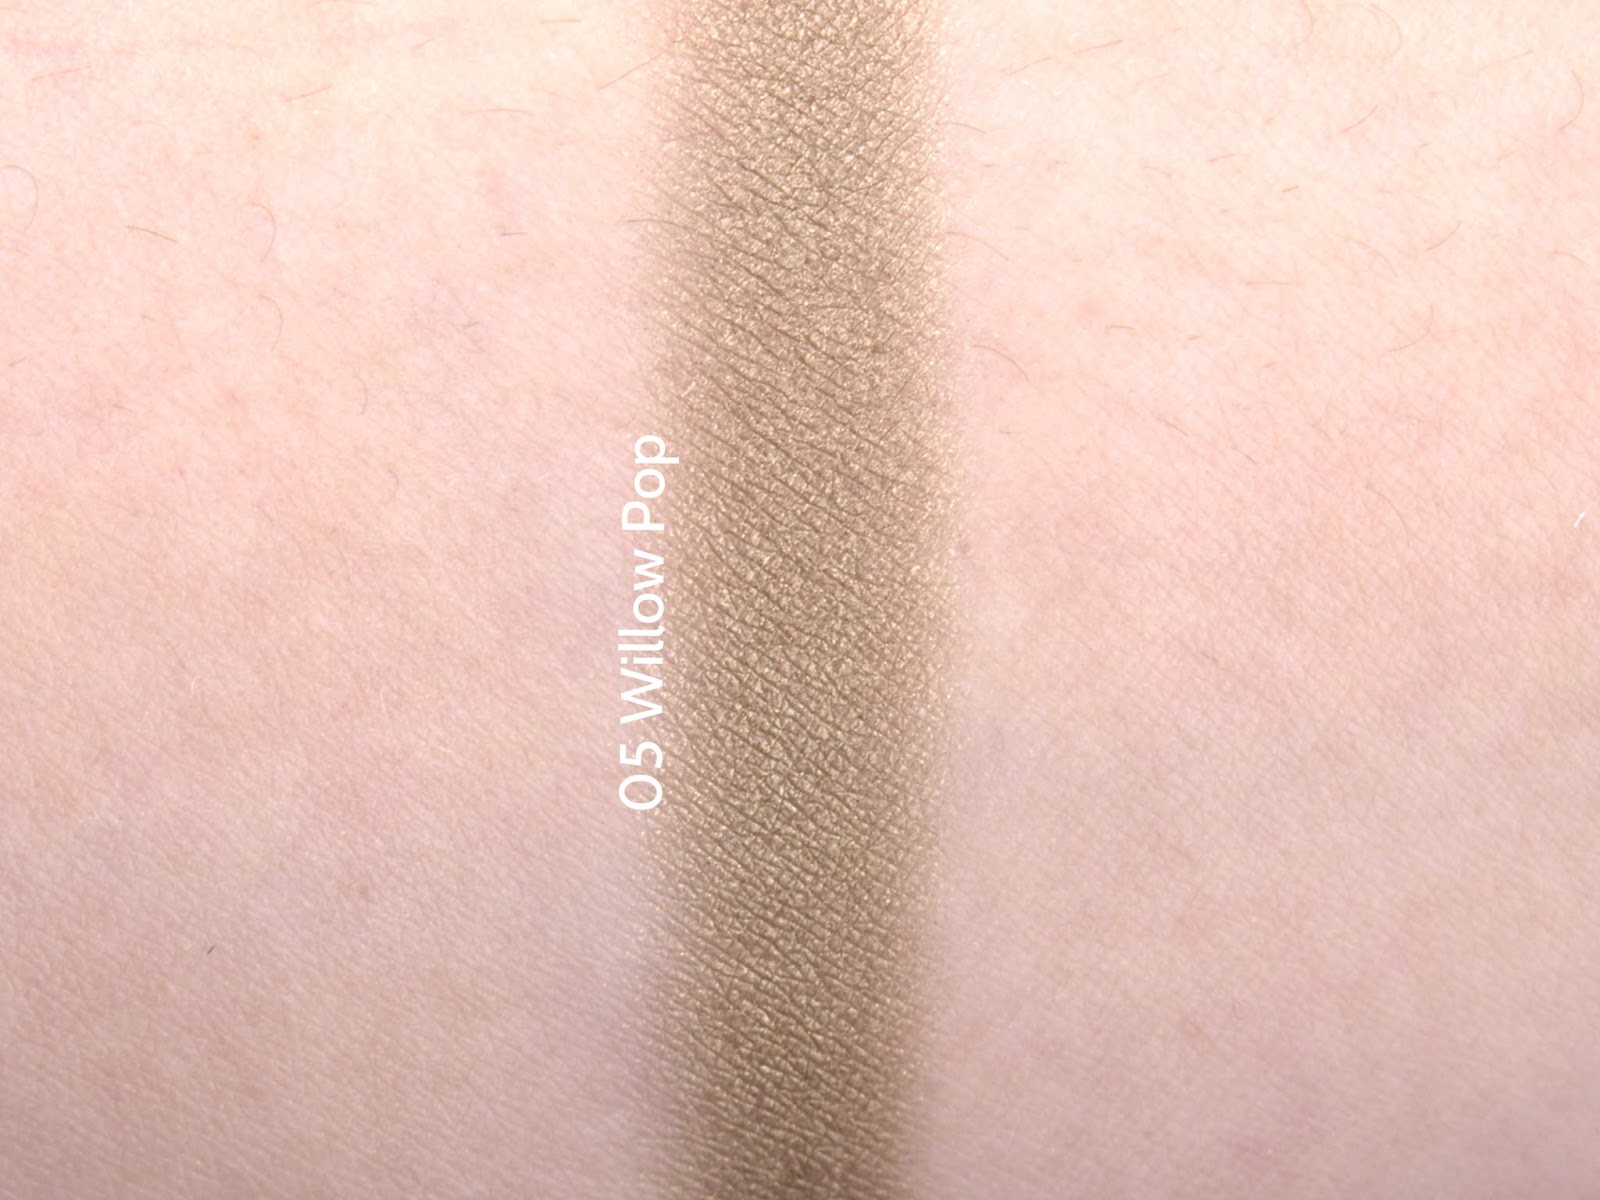 Clinique Lid Pop Eyeshadows: Review and | The Happy Sloths: Beauty, Makeup, and Skincare Blog with Reviews and Swatches